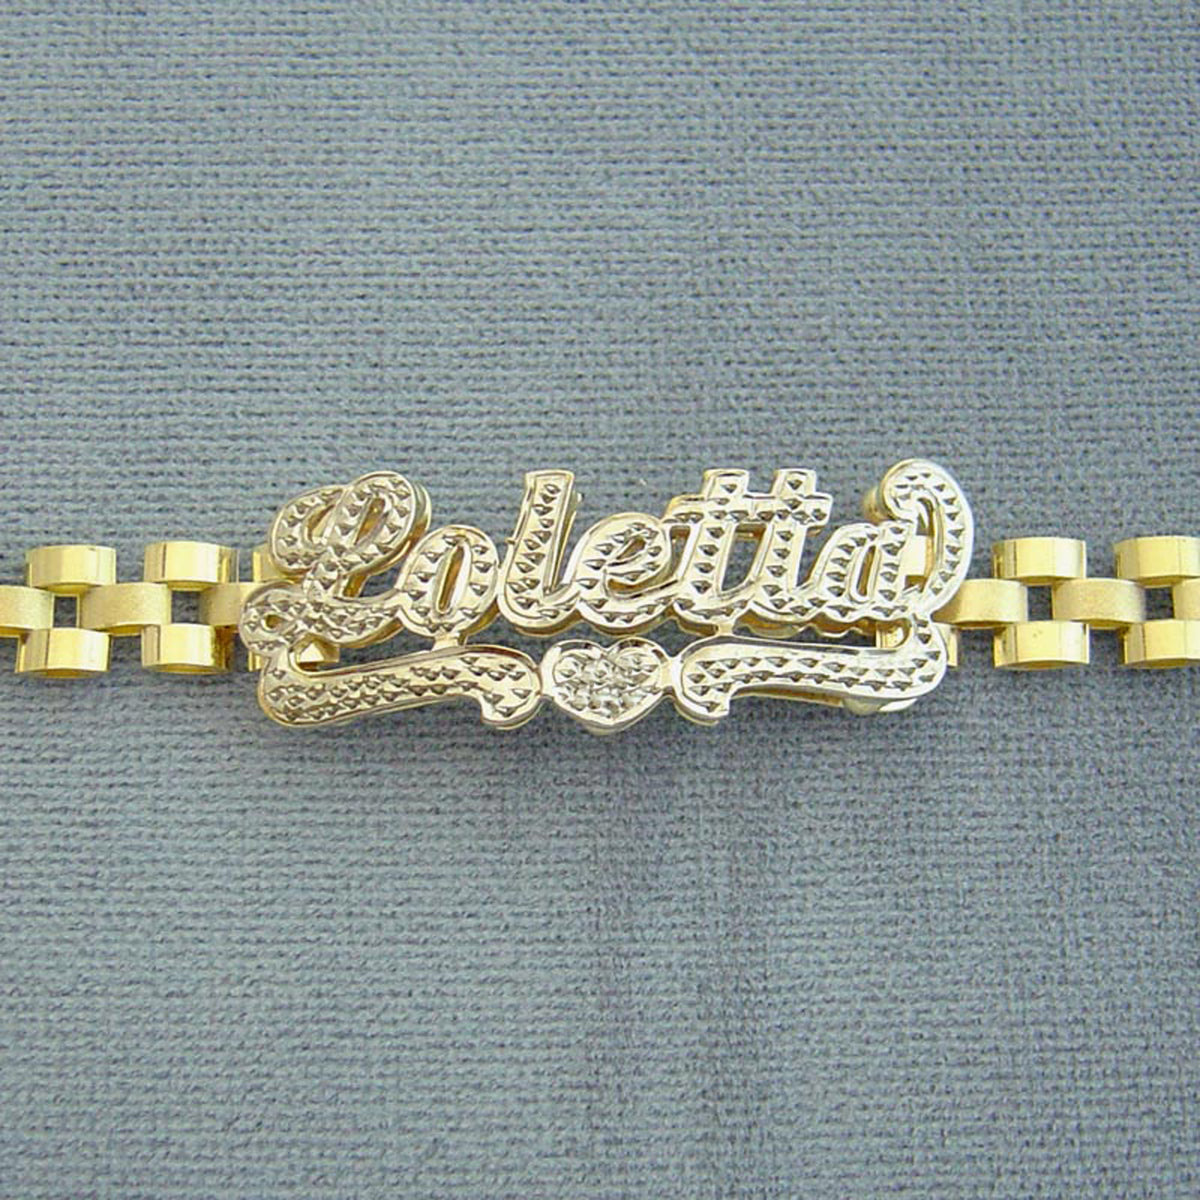 10K Solid Gold 6.0 mm Presidential Watch Band Style Link 3D Iced Out Nameplate Bracelet Anklet